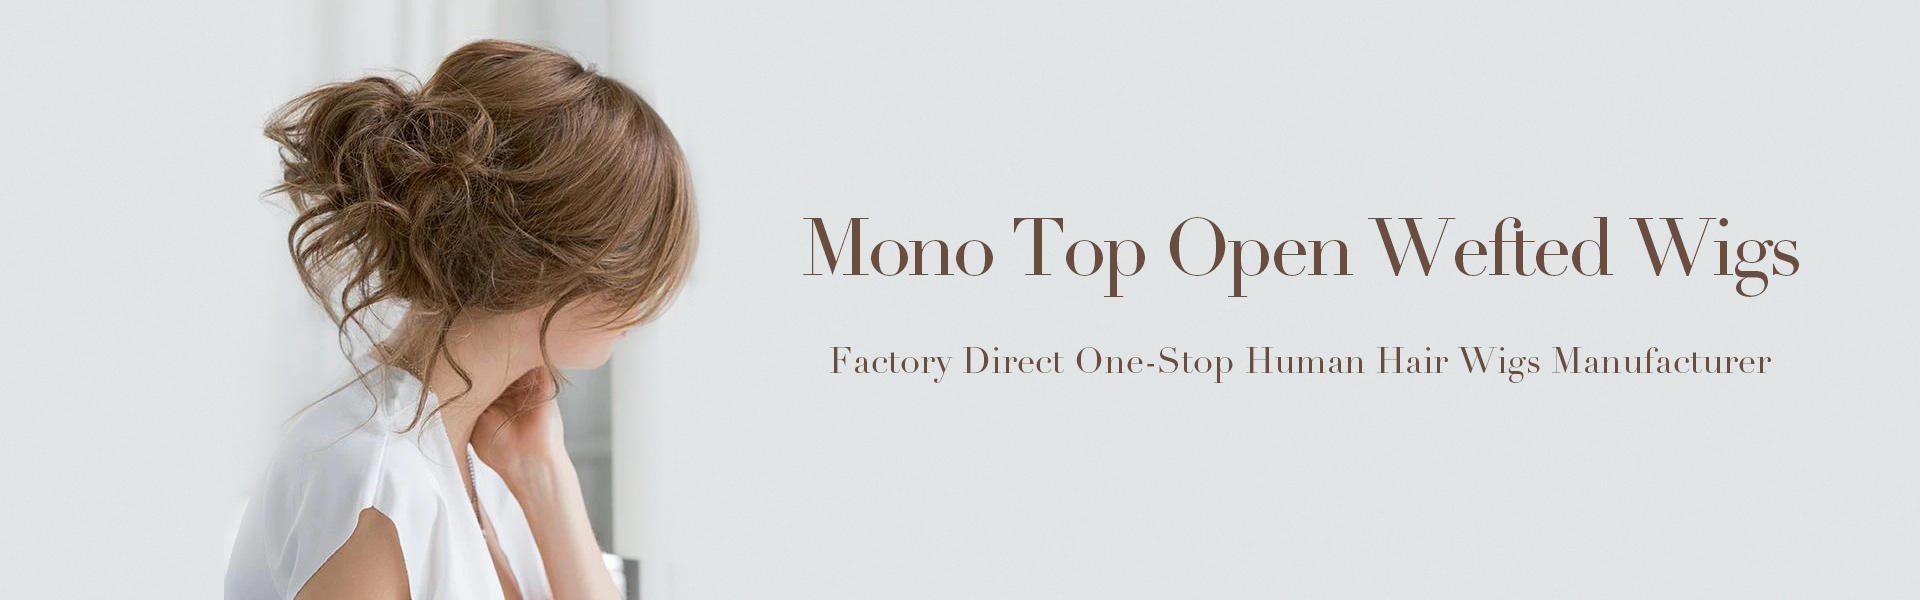 Mono Top Open Wefted Wigs